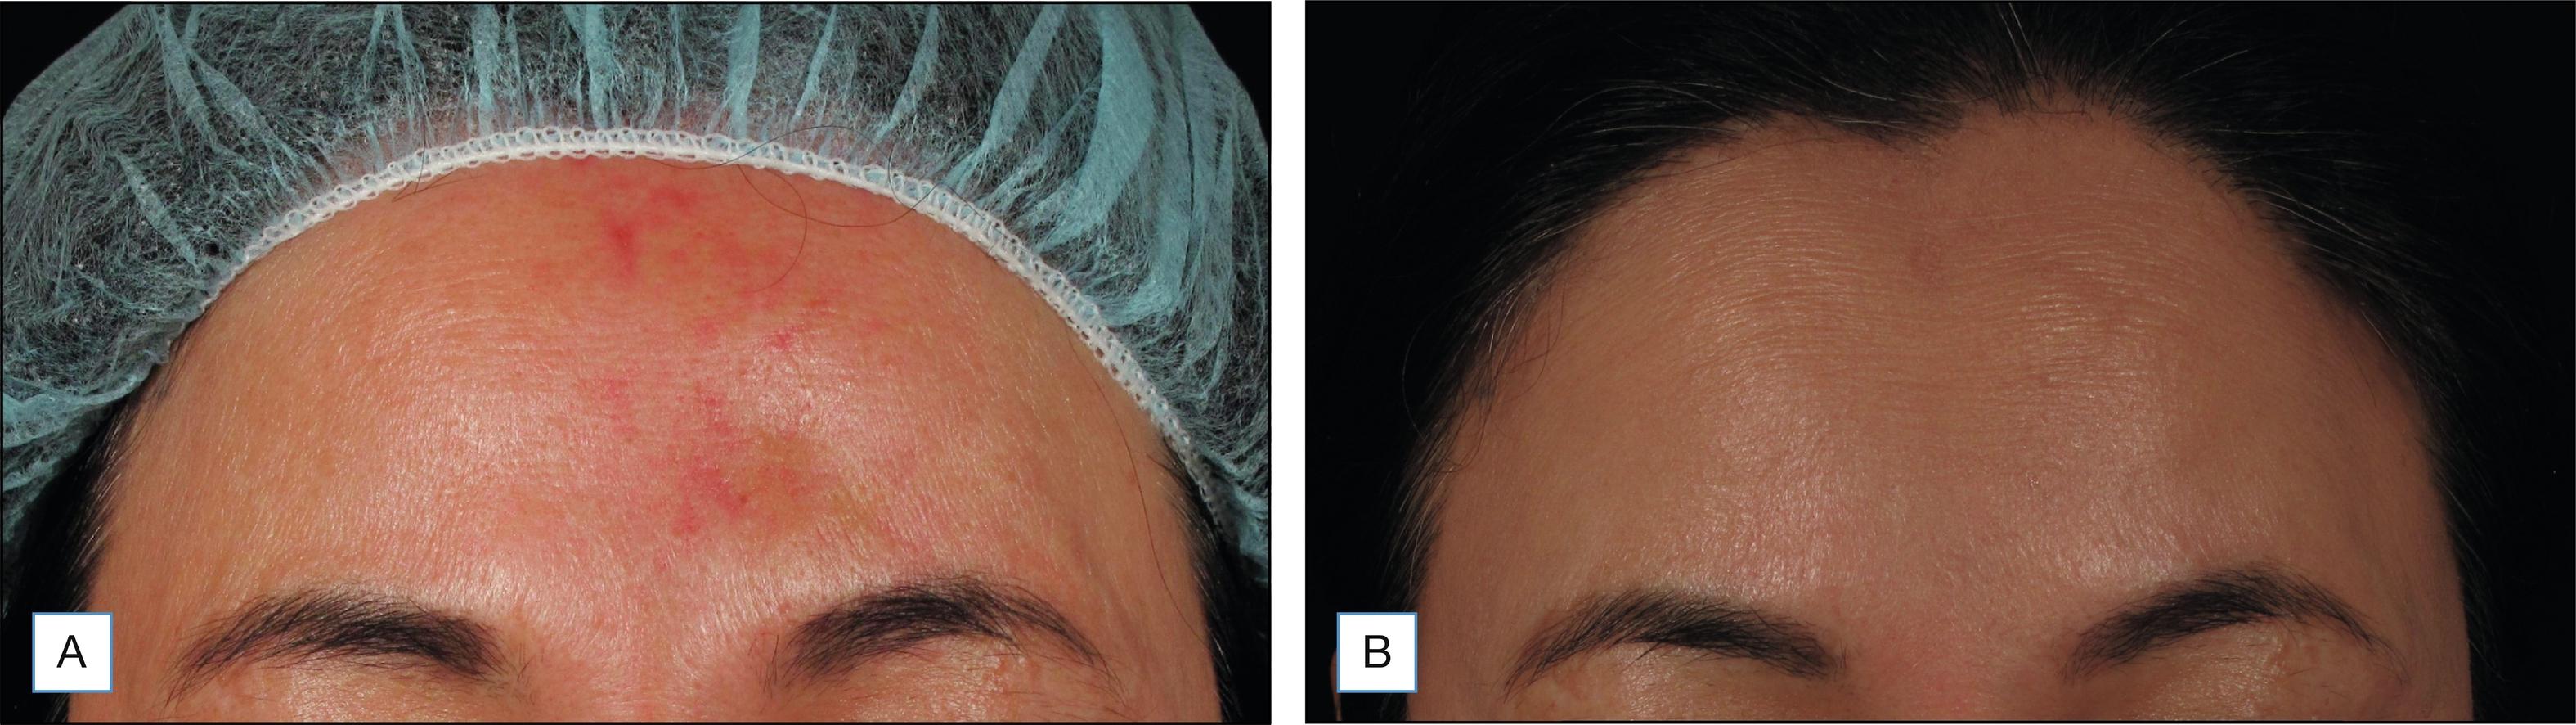 Fig. 37.1, Mottled erythema to forehead, 5 days post injection (A). Resolution of vascular compromise with no sequelae, 2.5 months post injection (B).